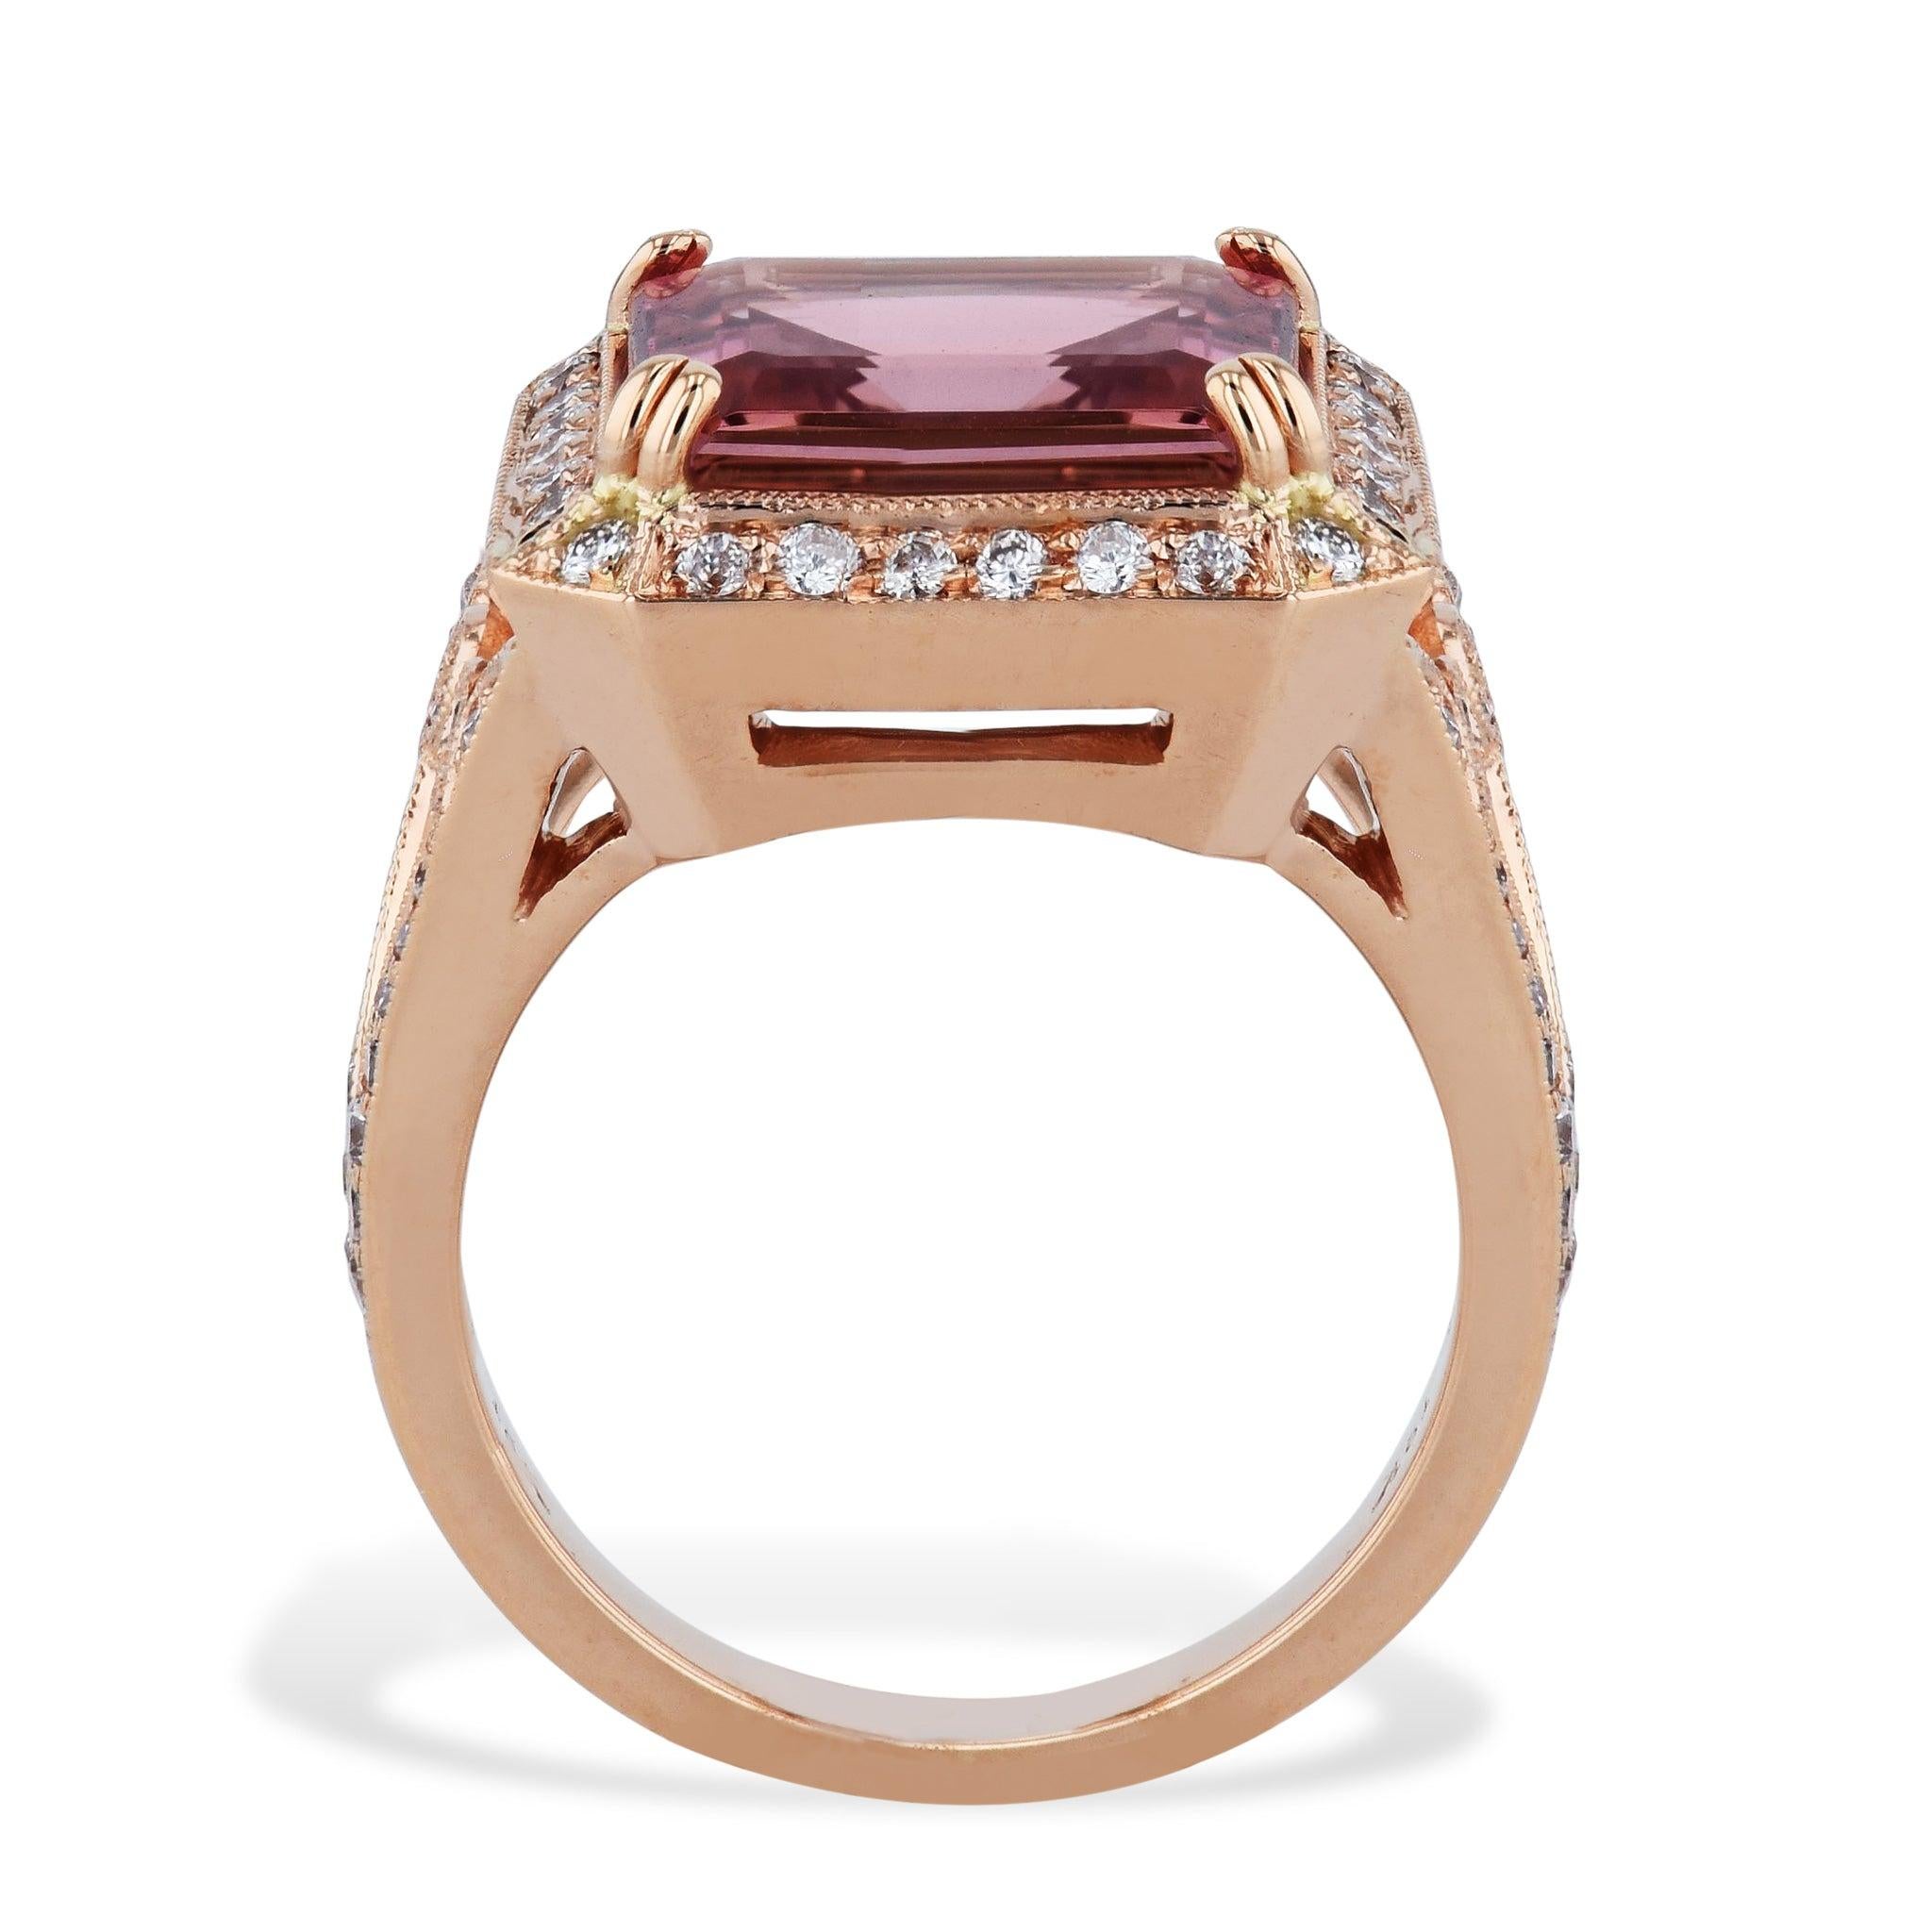 
Treat yourself to this exquisite Emerald Cut Pink Tourmaline Ring with Diamonds. Crafted with 18 karat rose gold, this stunning piece features a captivating 5.01 carat Pink Tourmaline in the center surrounded by 70 shimmering diamonds. 

Currently